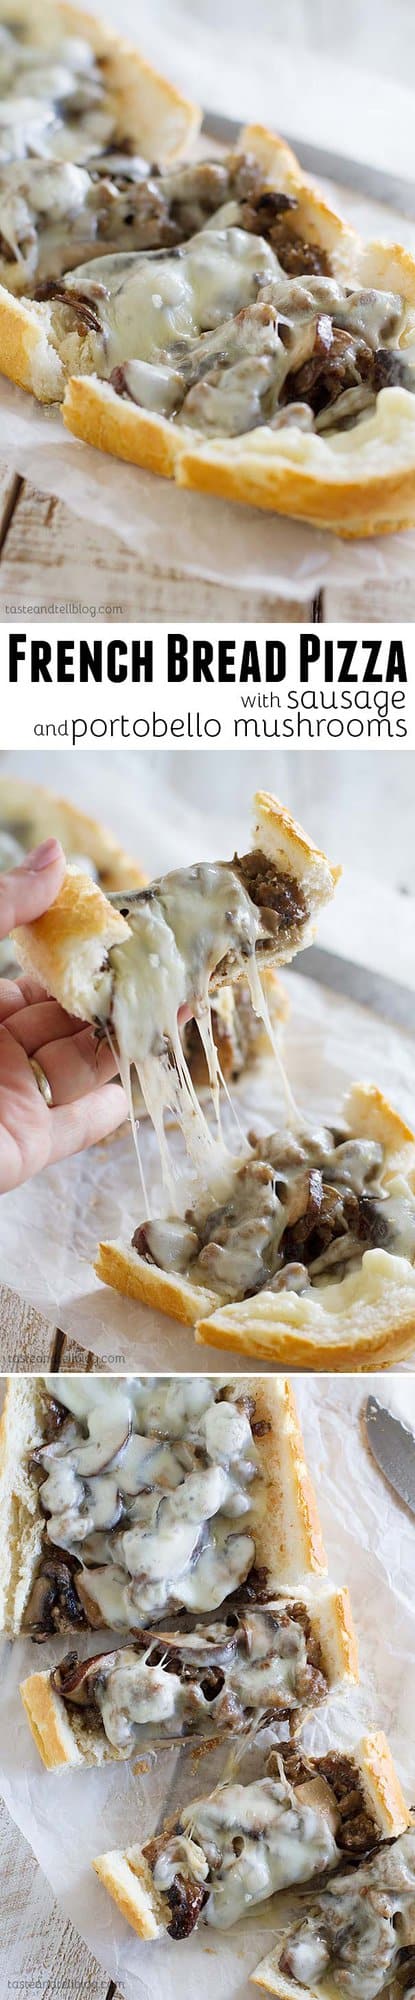 French bread is topped with cooked sausage, portobello mushrooms and cheese in this easy French bread pizza recipe.